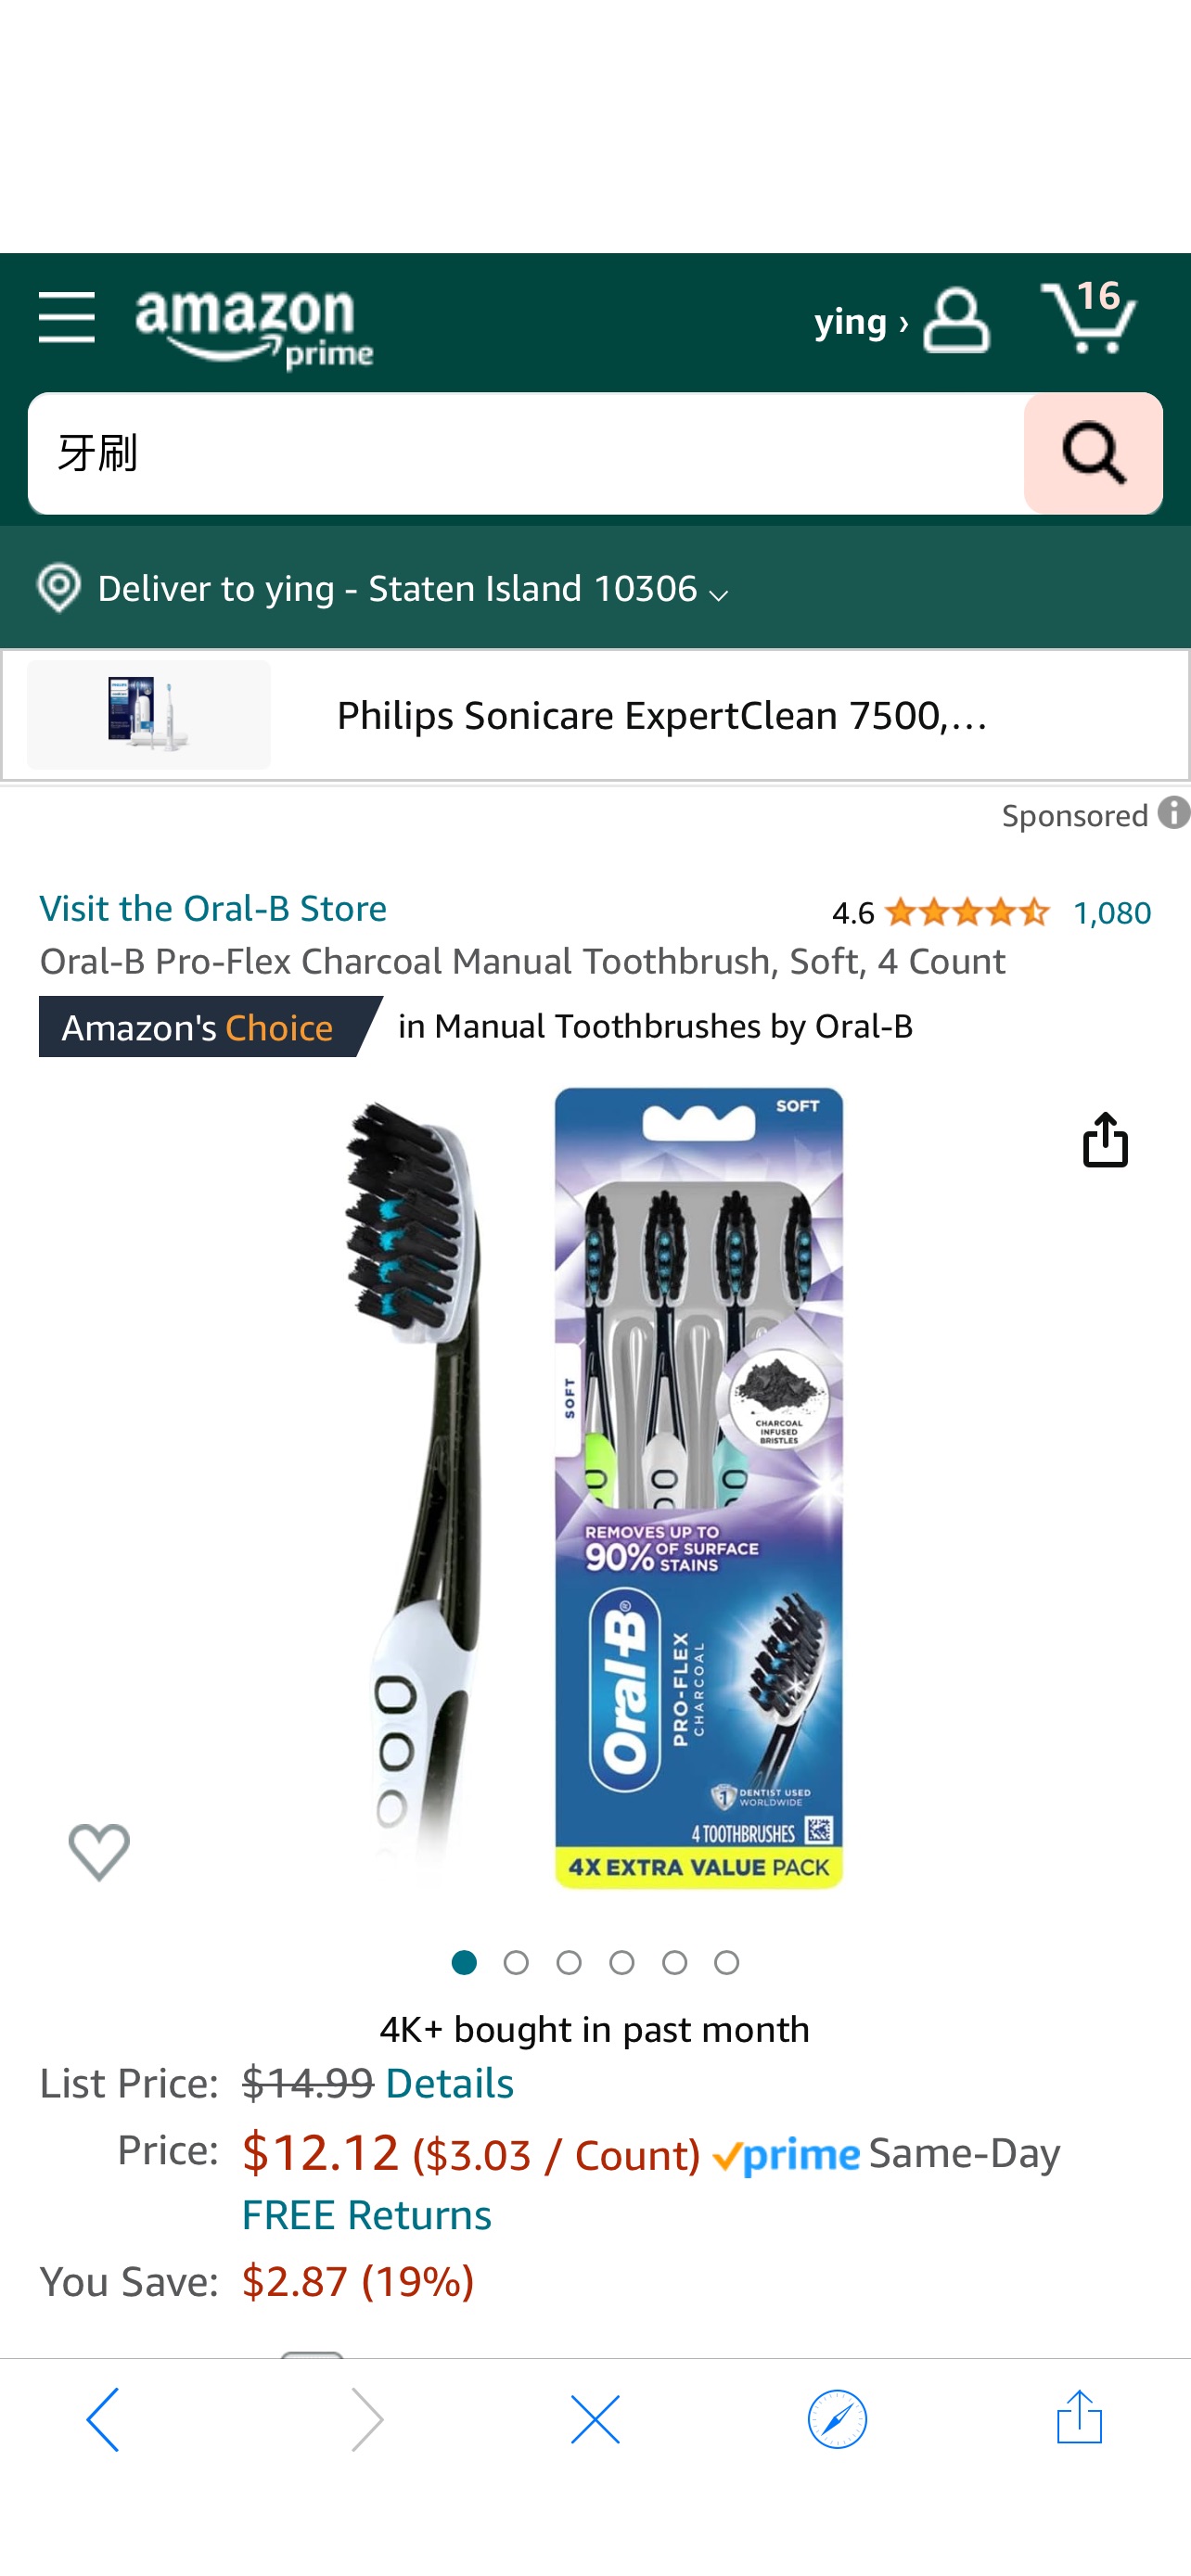 Amazon.com : Oral-B Pro-Flex Charcoal Manual Toothbrush, Soft, 4 Count : Health & Household